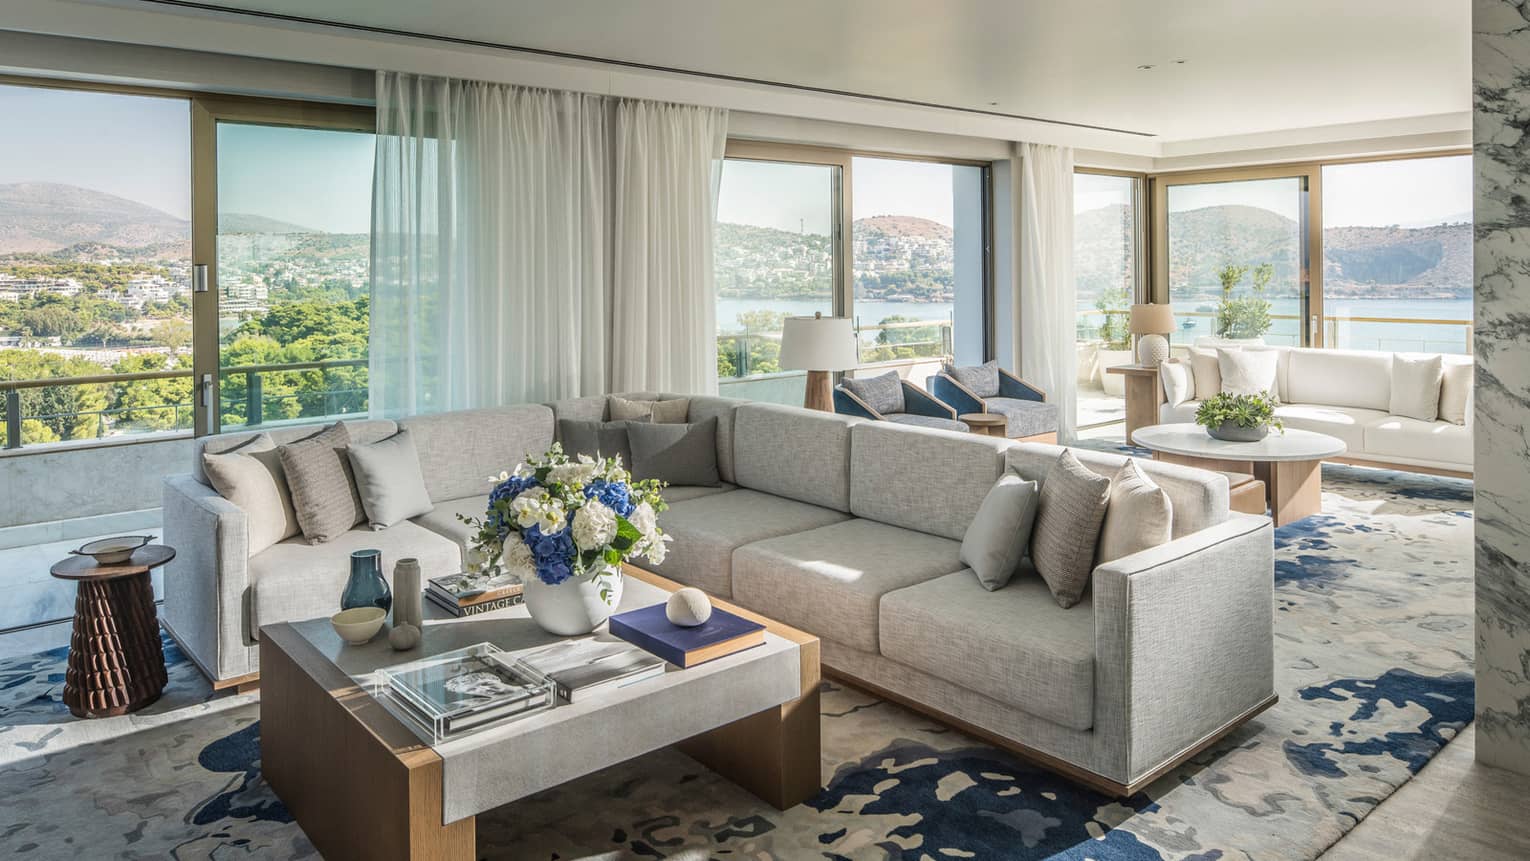 Arion Riviera Suite living area with white sectional sofa, square coffee table, patterned area rug, panoramic ocean views